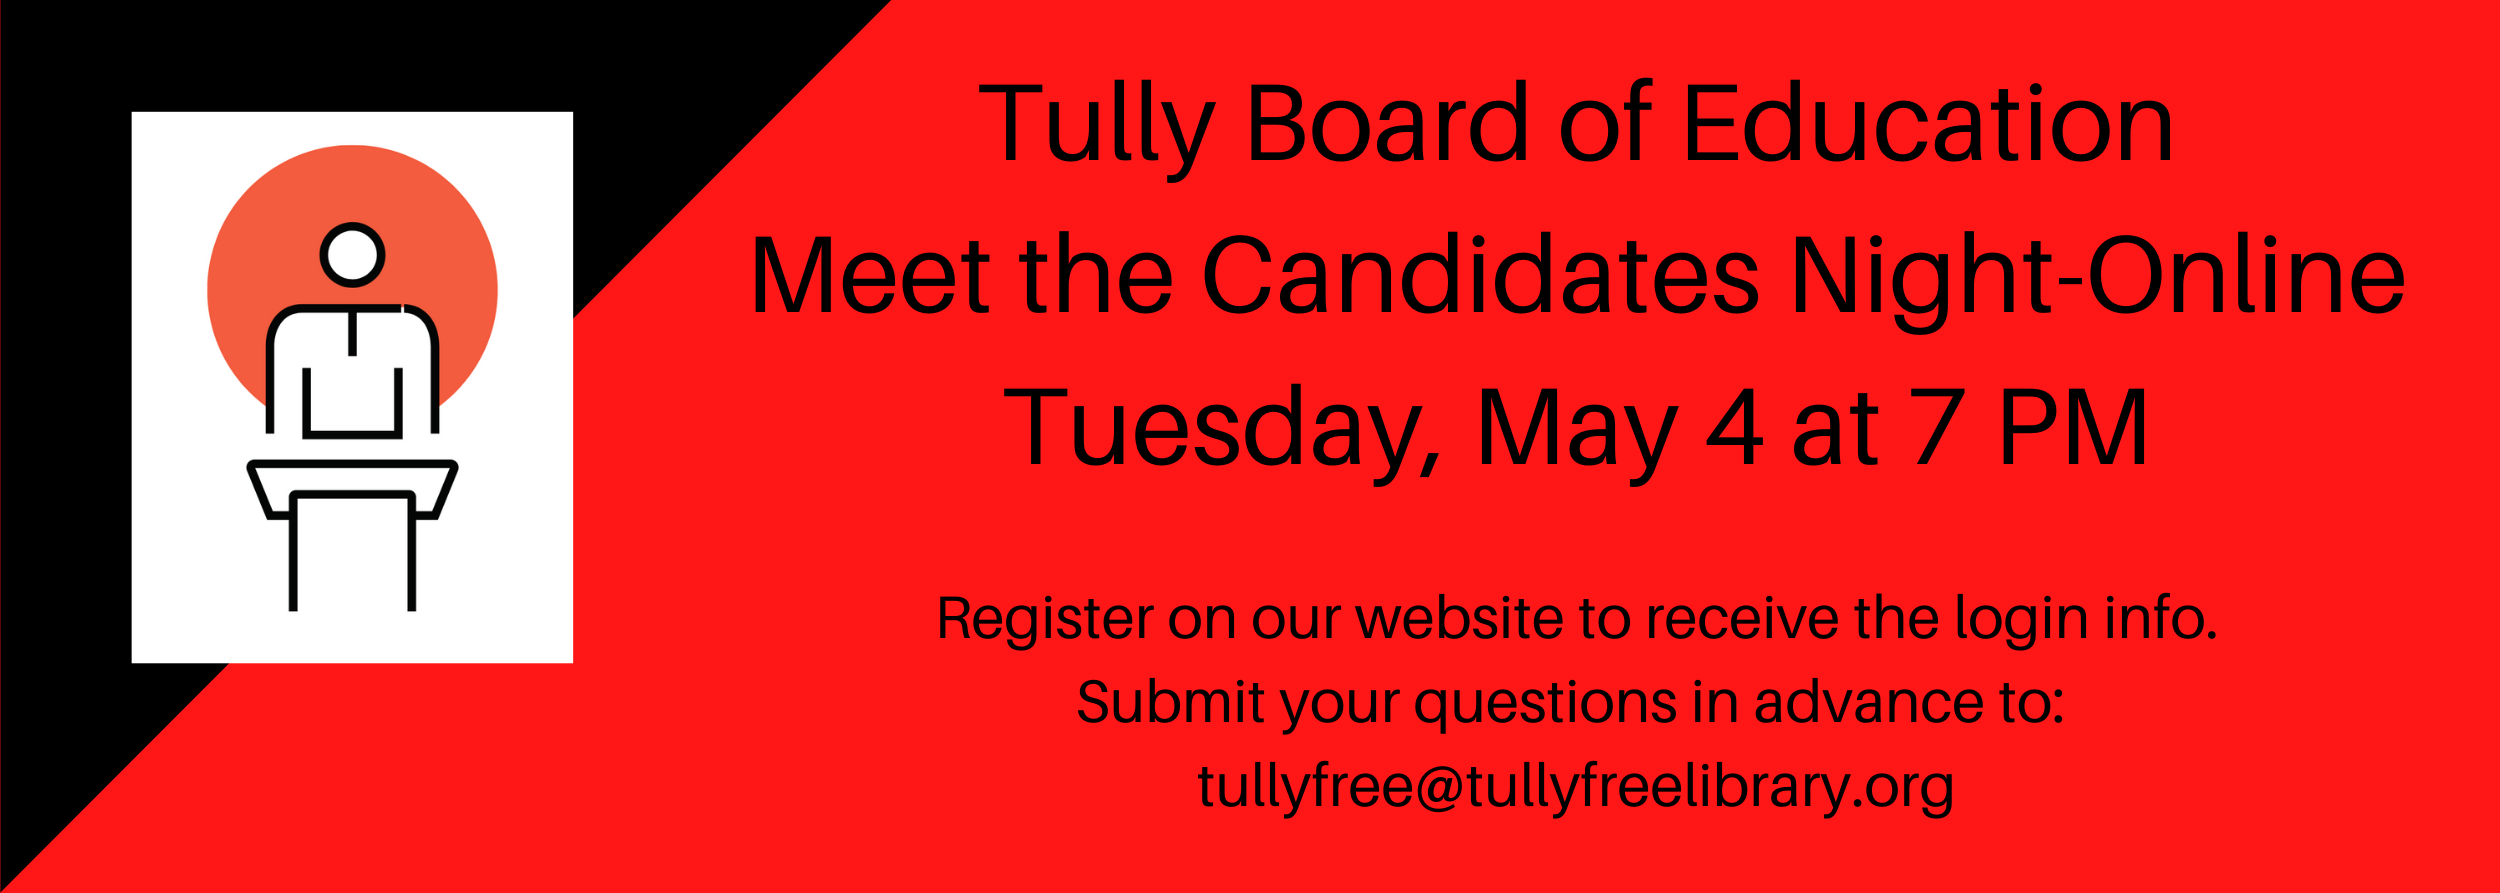 candidates night website banner.png